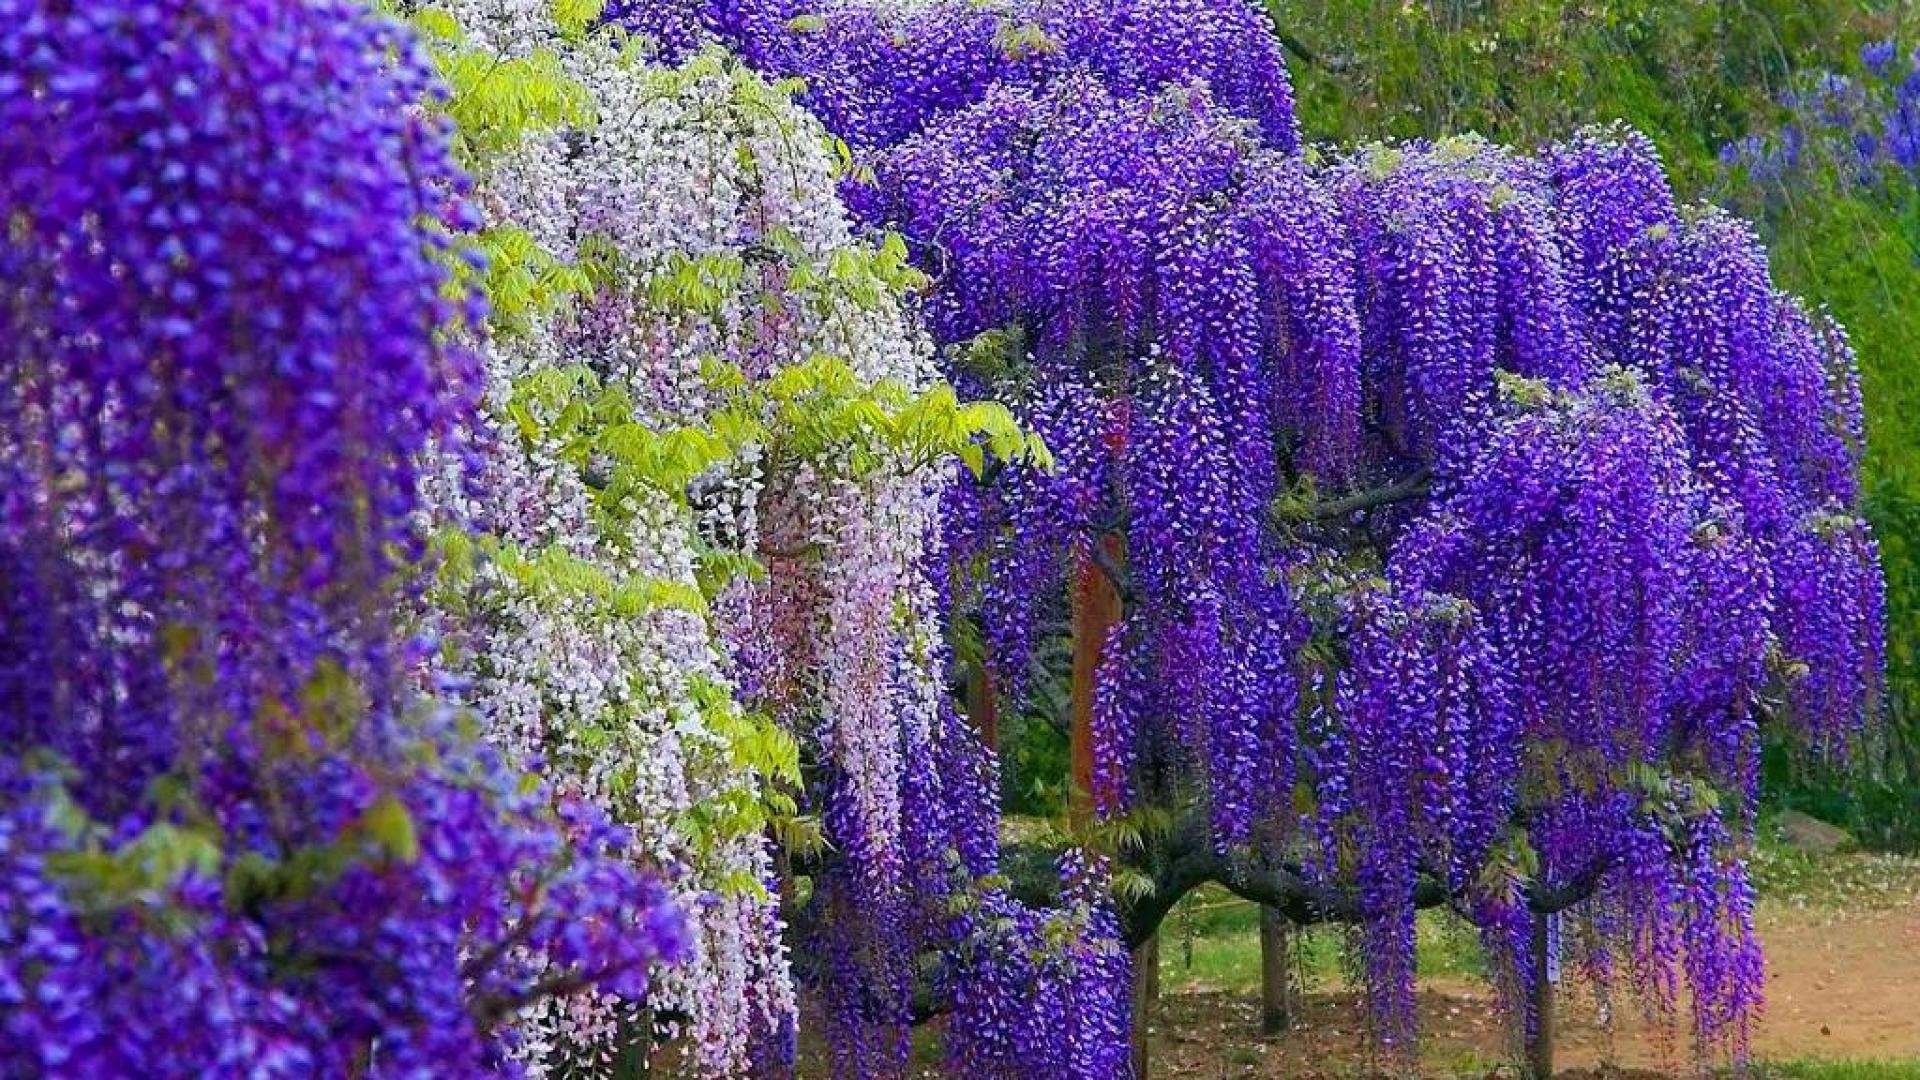 1920x1080 Wallpaper Tags: wisteria garden summer lovely rest park nature nice  beautiful trees colorful beauty